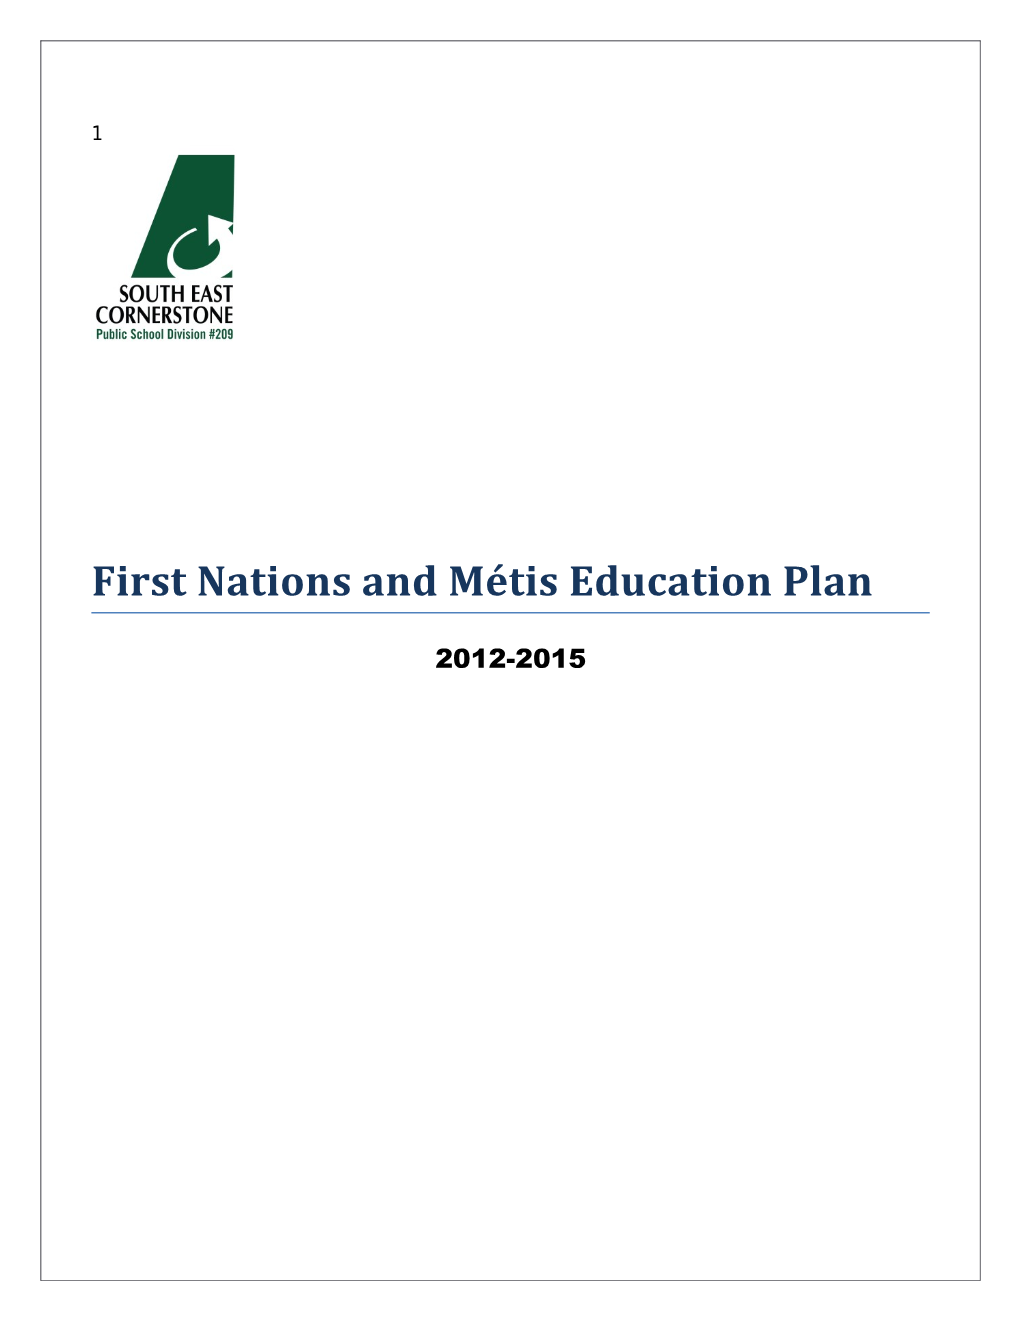 First Nations and Métis Education Plans